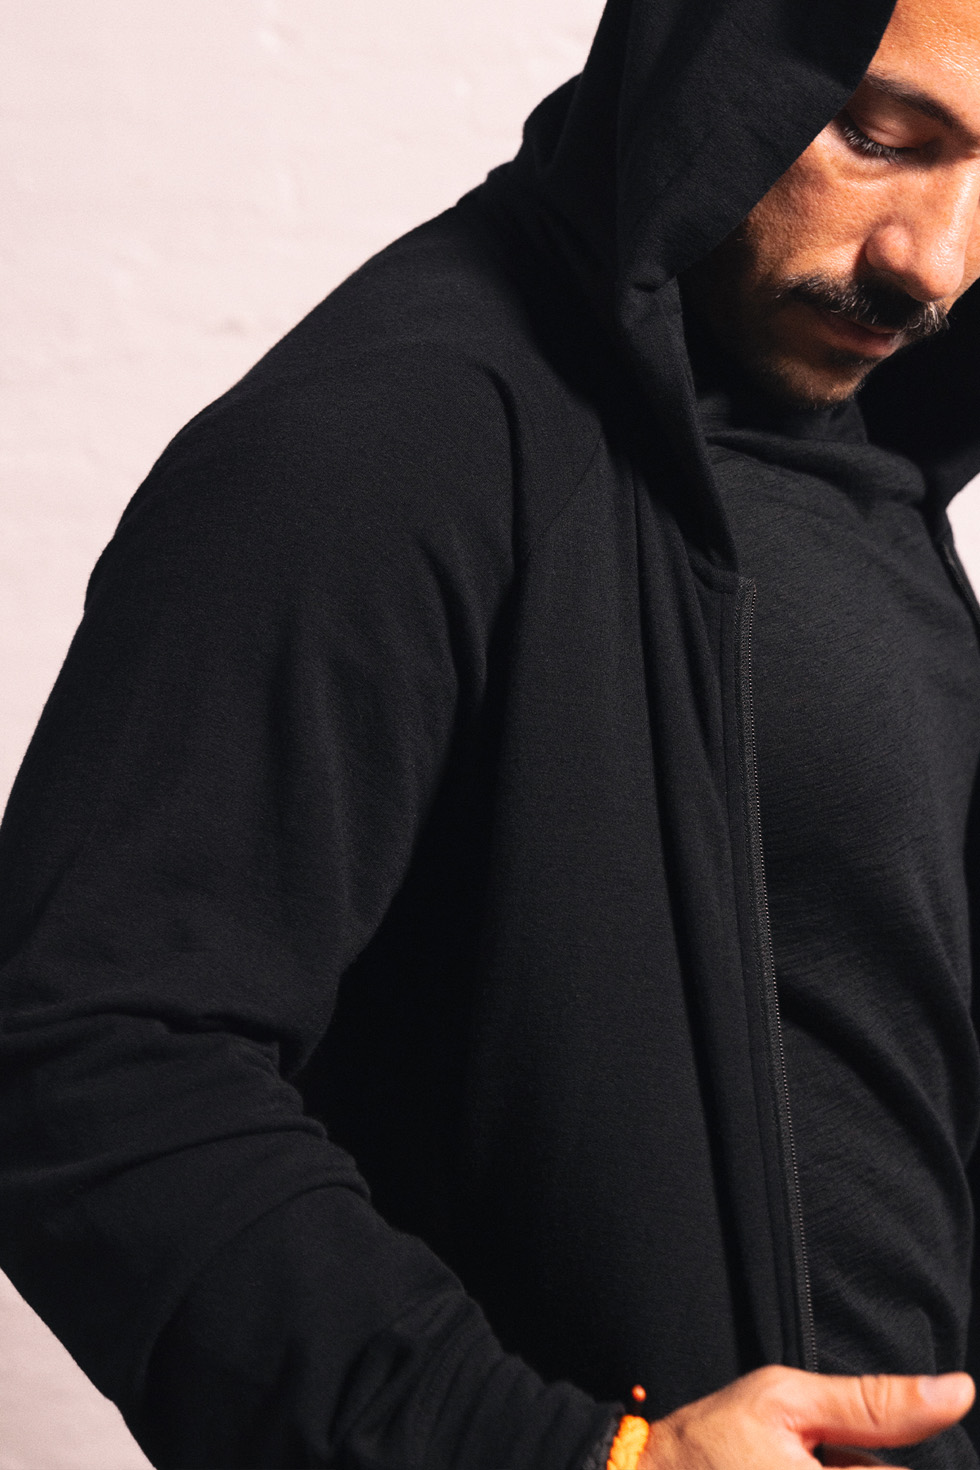 Unbound Merino Hoodie Review – A BROTHER ABROAD